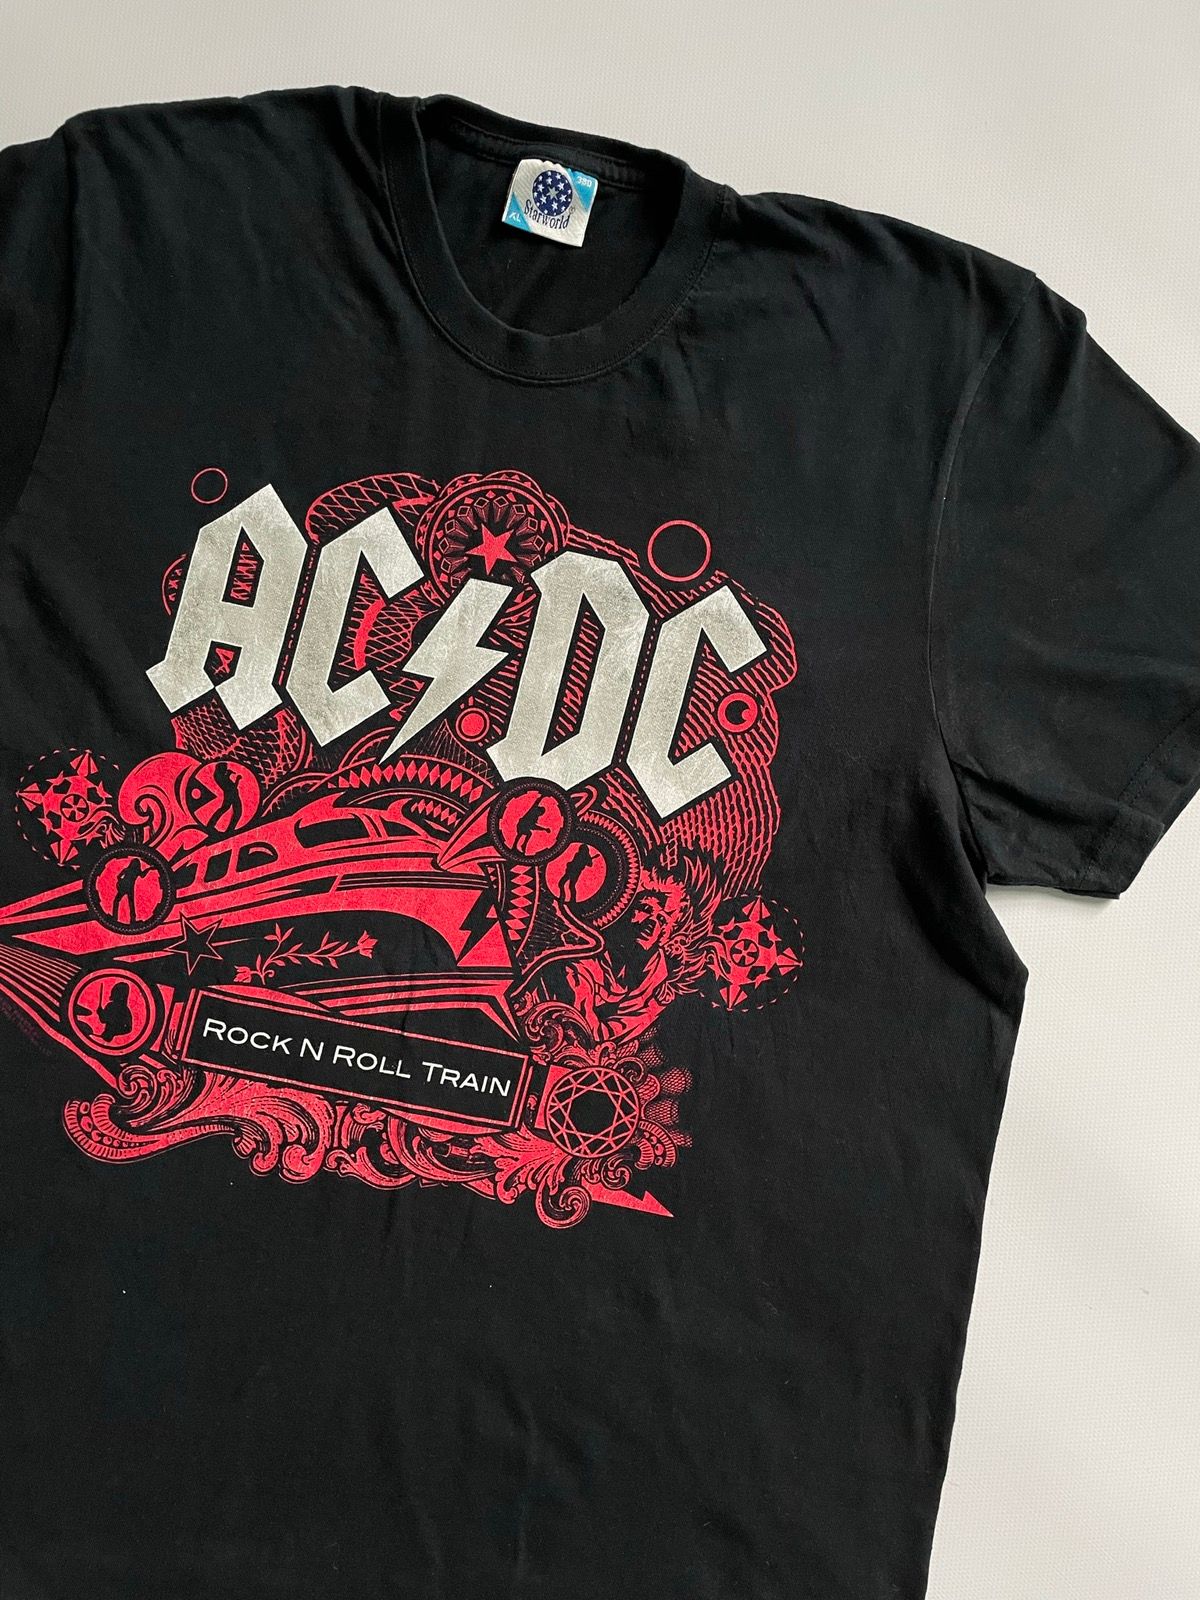 Pre-owned Acdc X Band Tees Ac/dc 2009 Black Ice World Tour “rock N Roll Train”